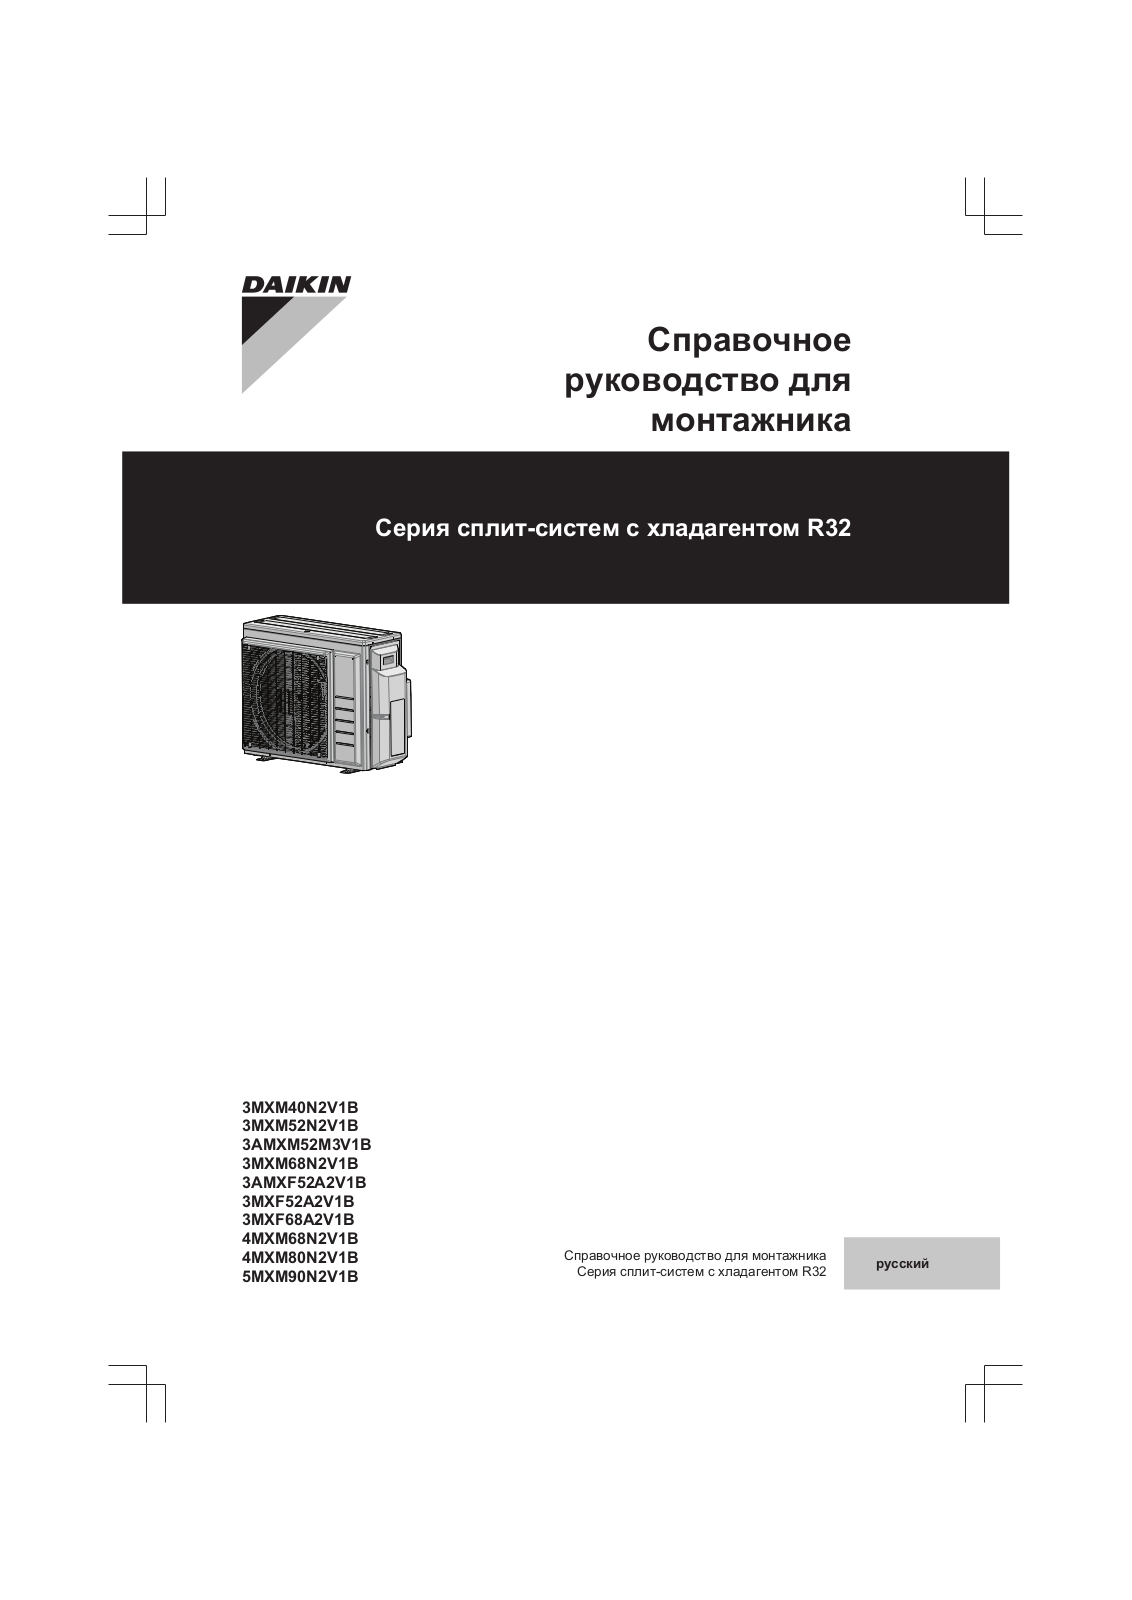 Daikin 3MXM40N2V1B, 3MXM52N2V1B, 3AMXM52M3V1B, 3MXM68N2V1B, 3AMXF52A2V1B Installer reference guide